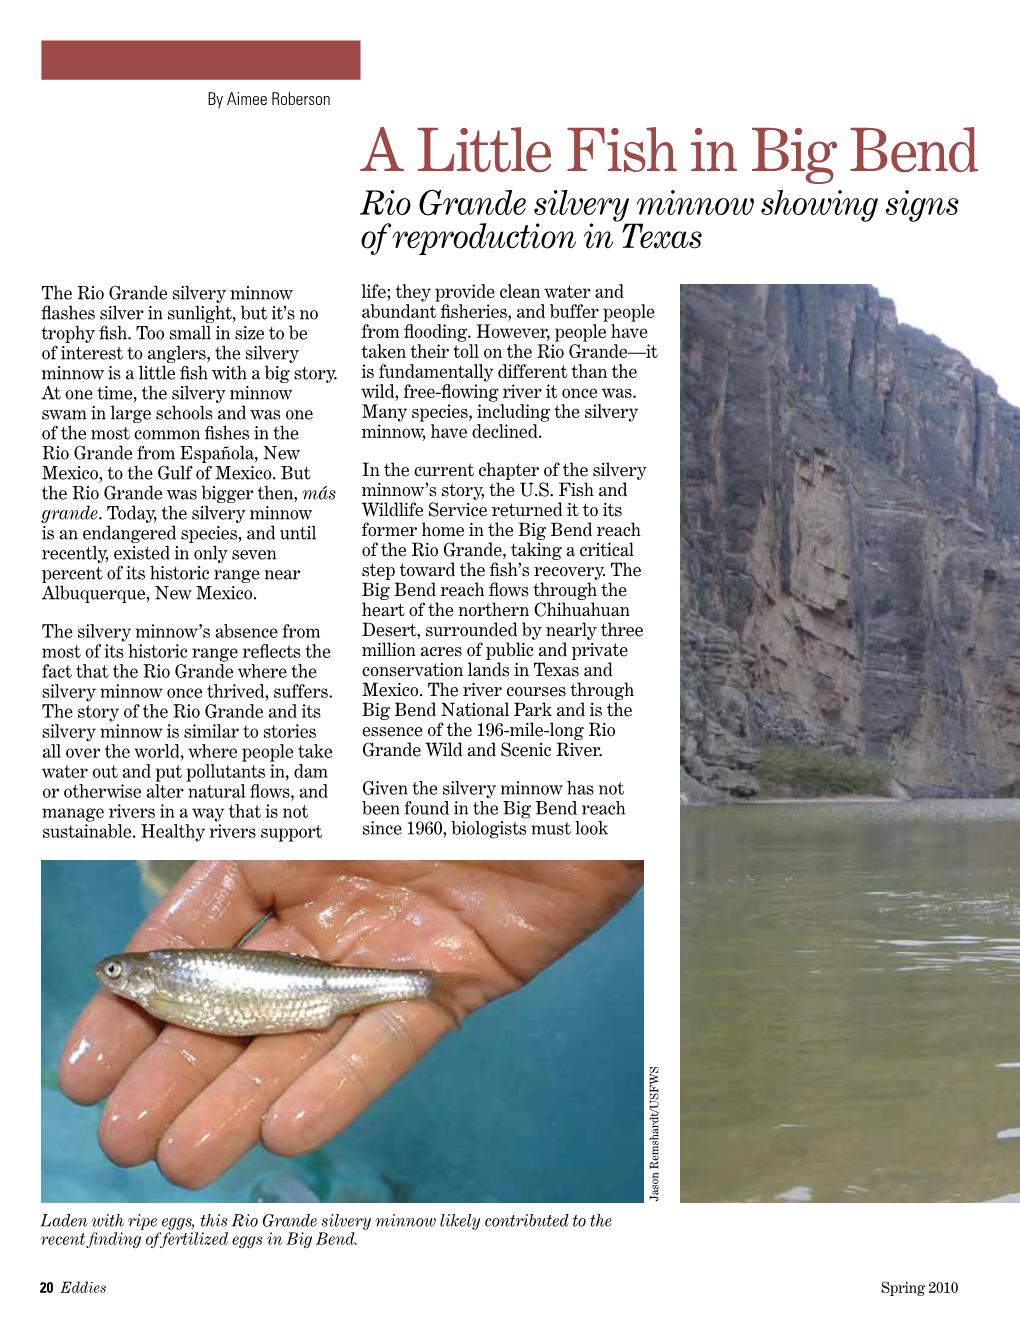 A Little Fish in Big Bend Rio Grande Silvery Minnow Showing Signs of Reproduction in Texas